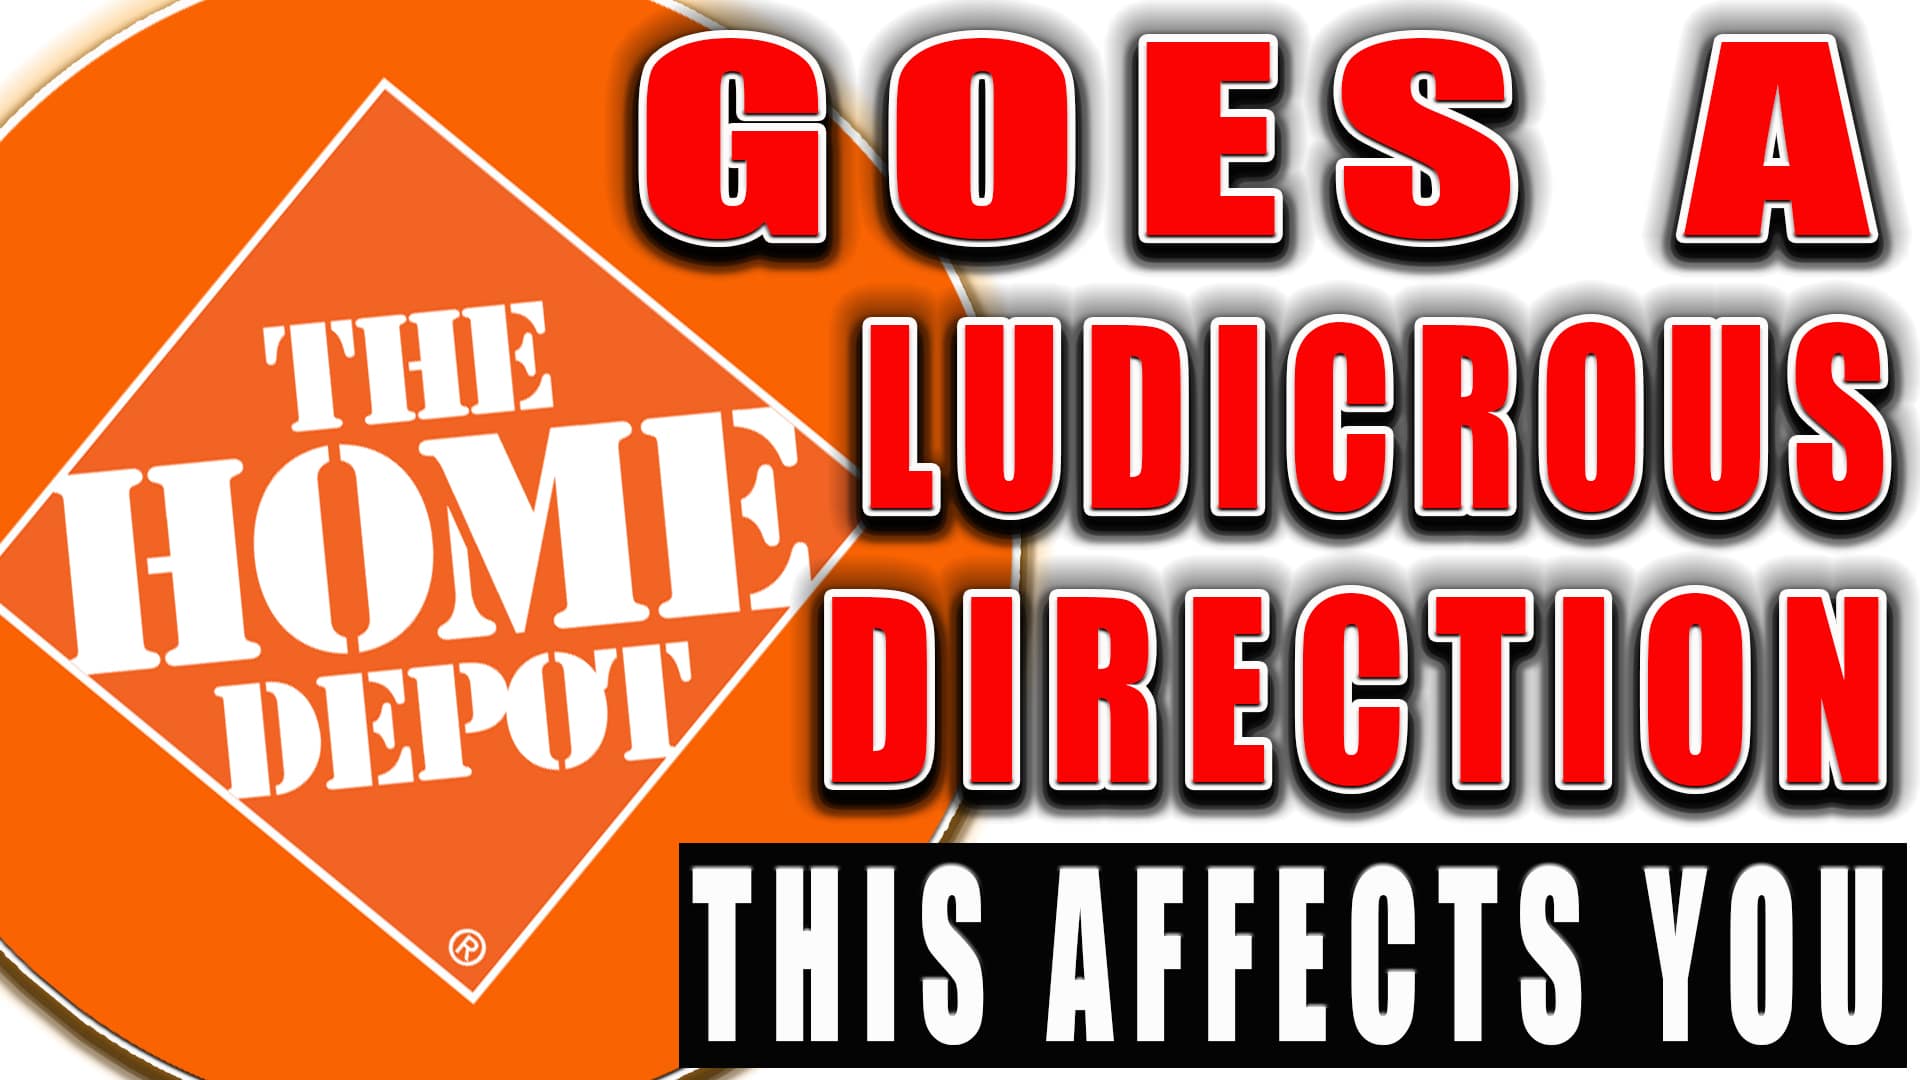 (THIS AFFECTS YOU) The Home Depot GOES LUDICROUS Direction